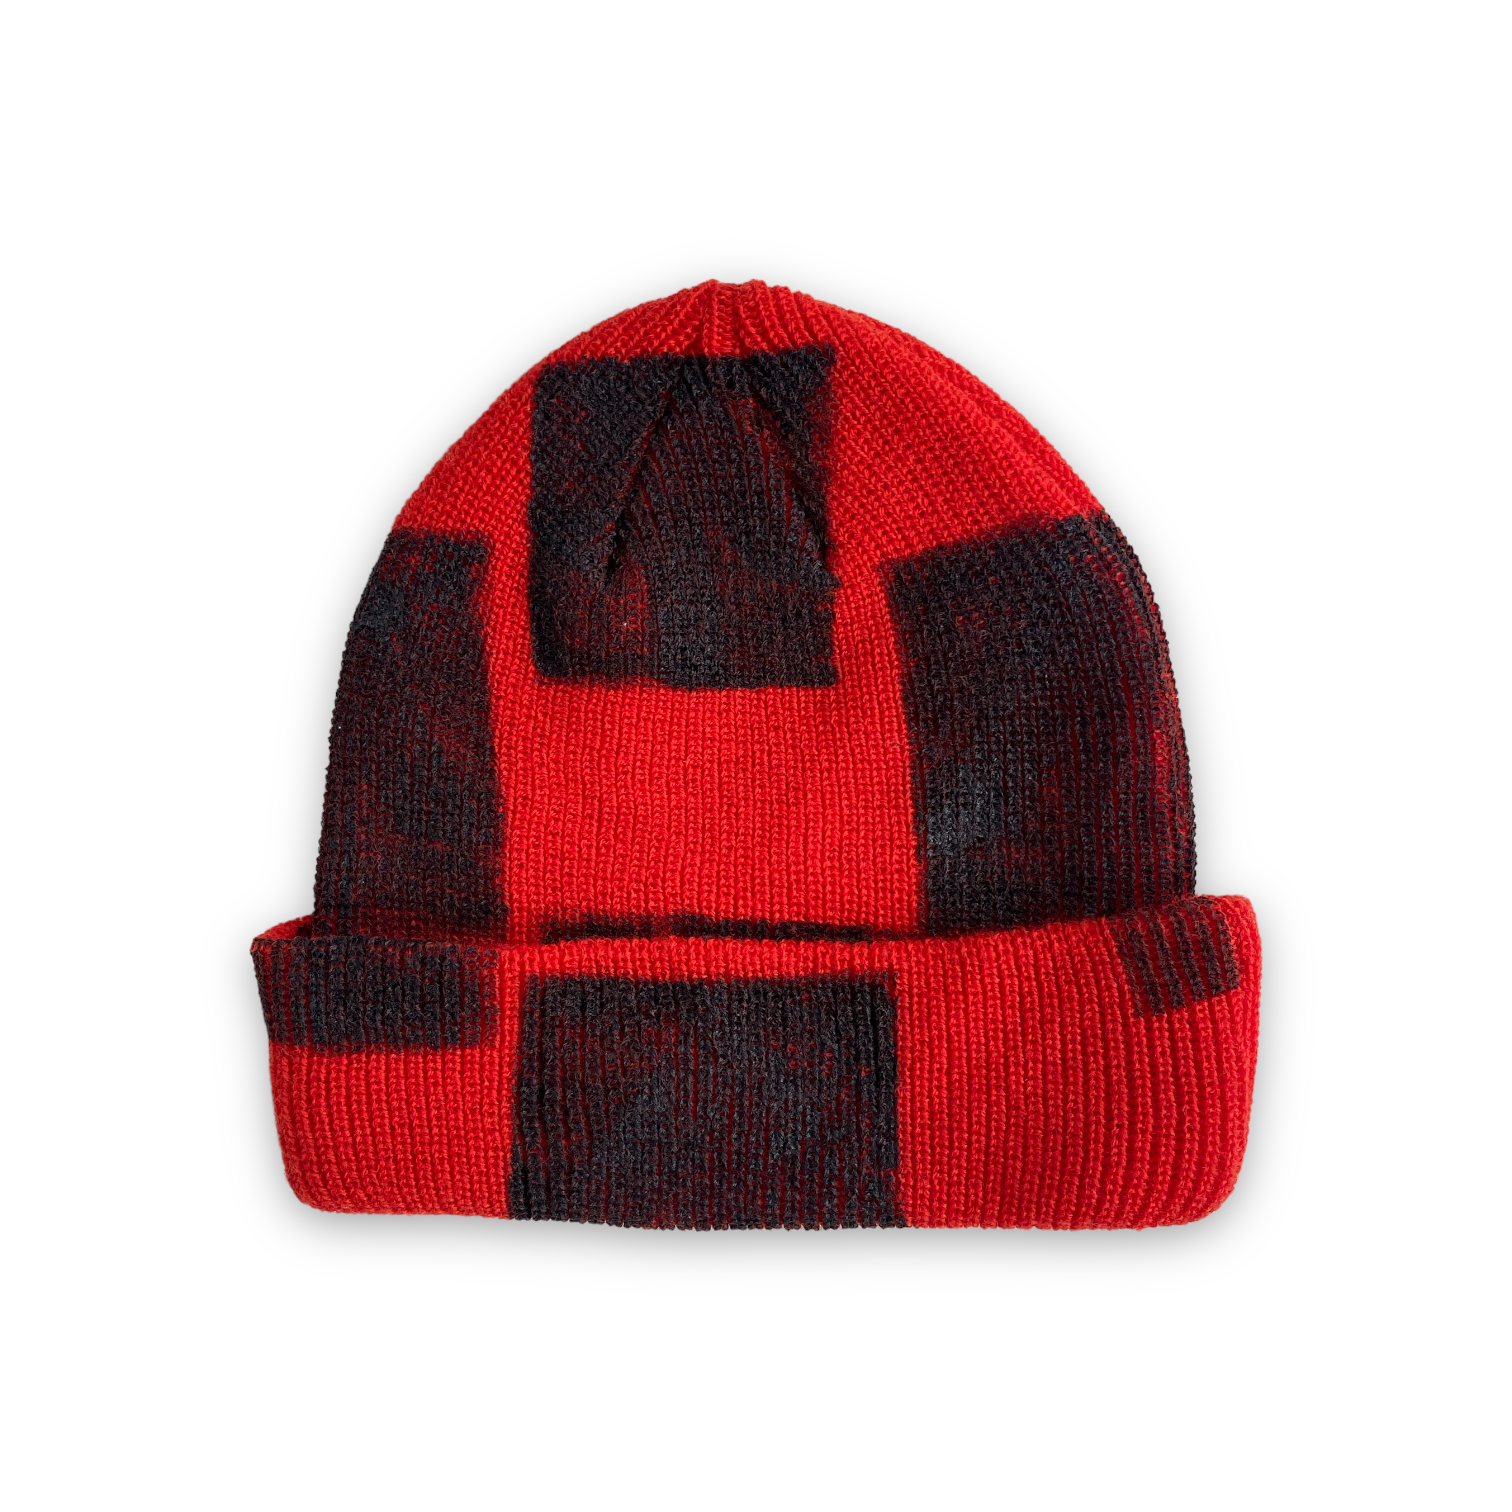 back of red beanie with hand painted checkered black squares